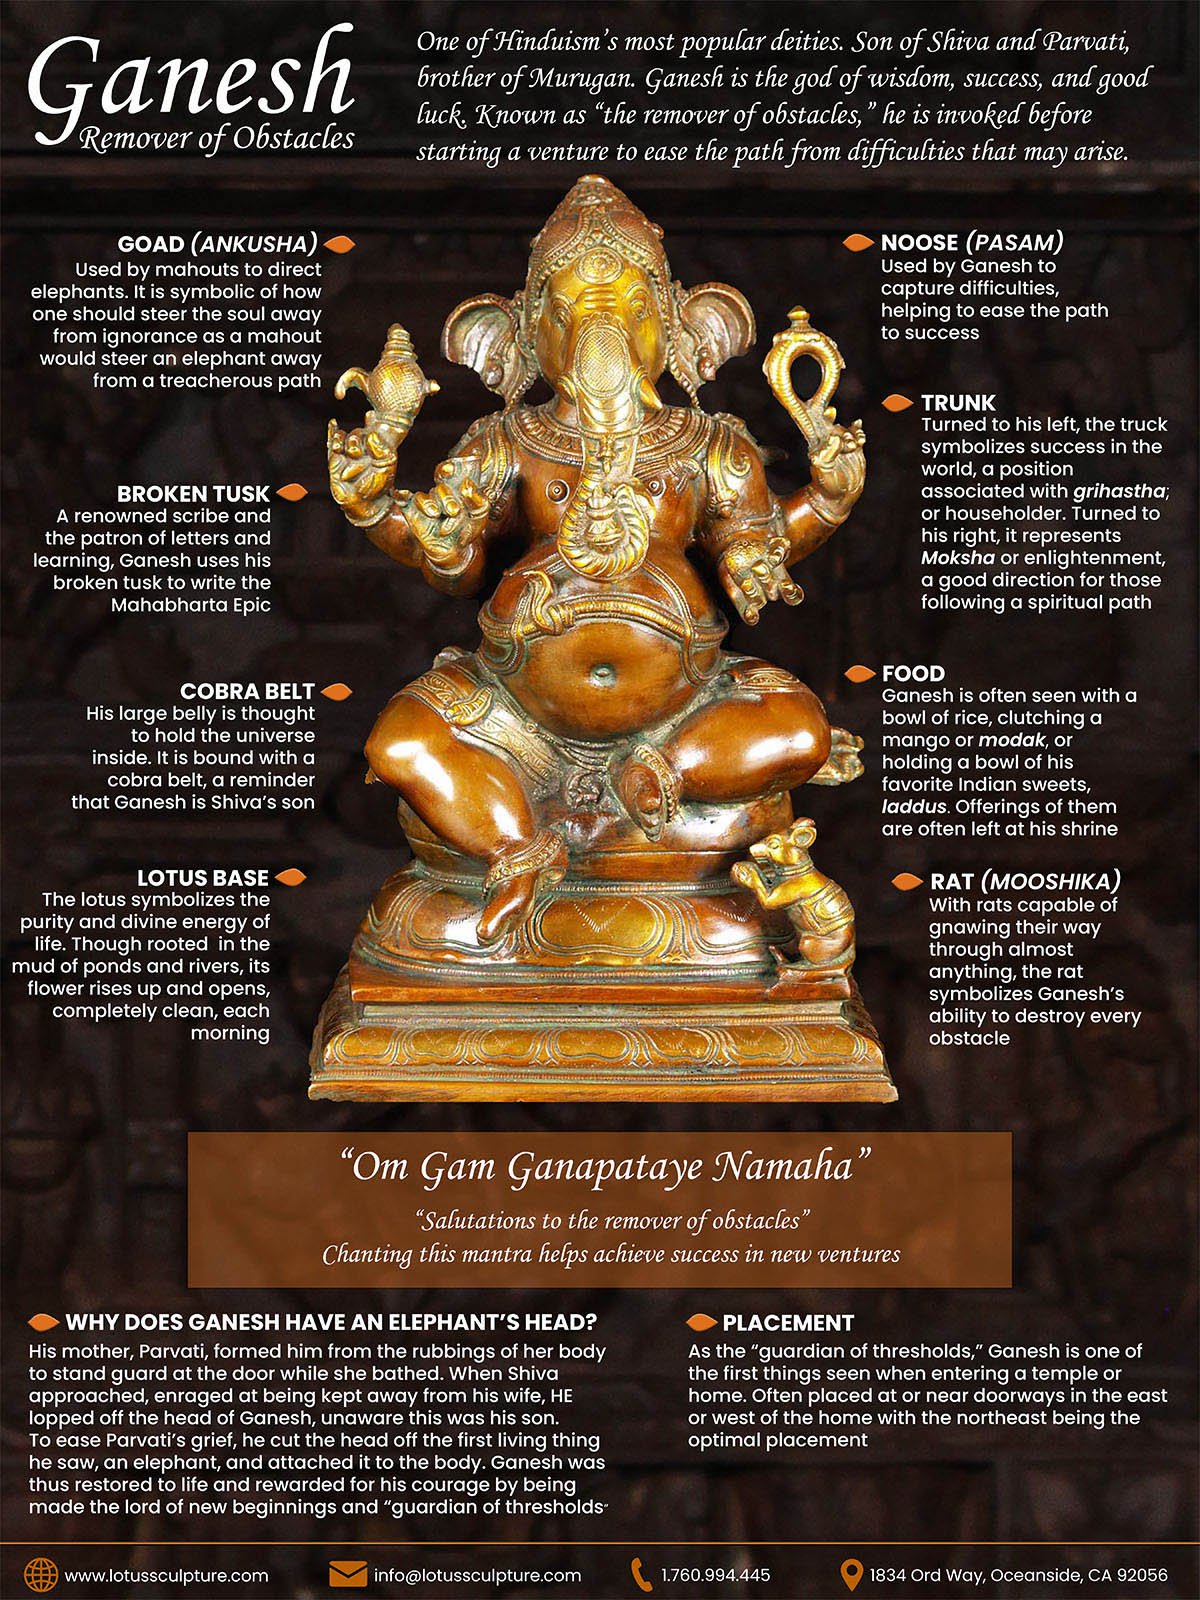 Ganesha Hindu God, the Remover Obstacles, Learn About Ganesh